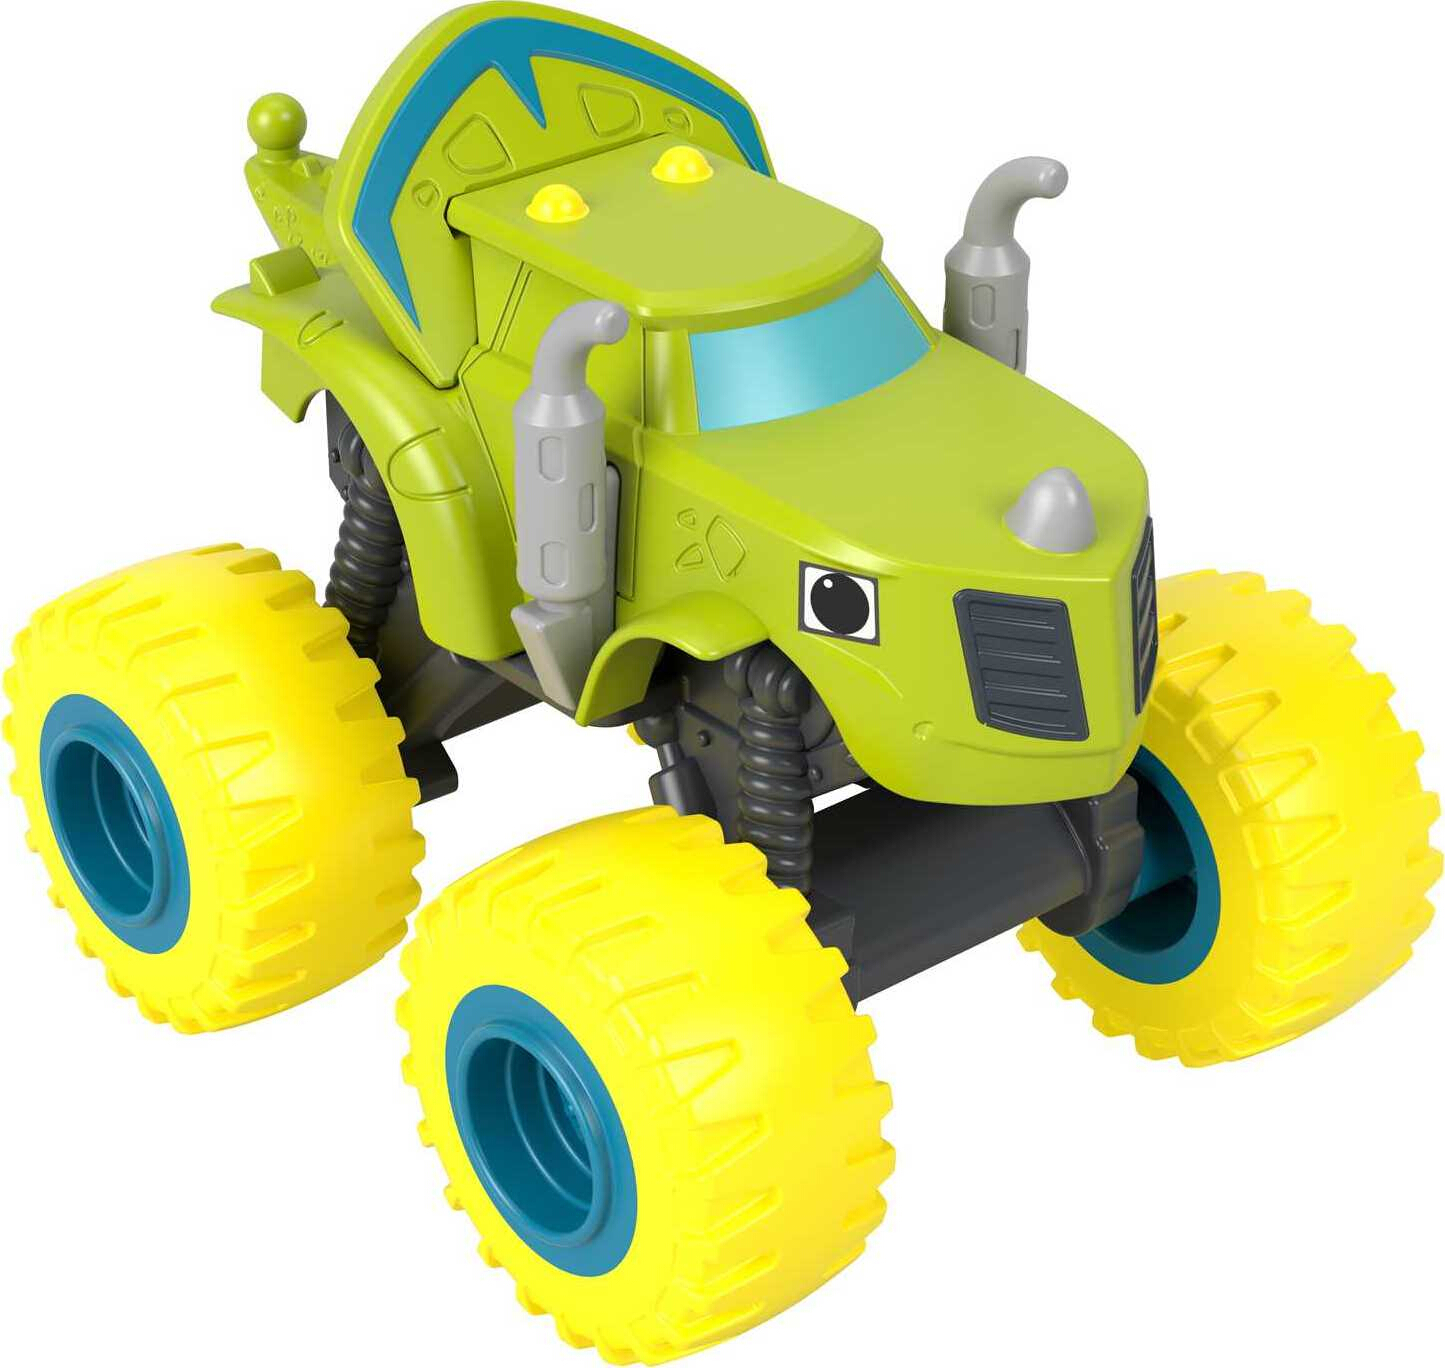 Fisher-Price Blaze and the Monster Machines Neon Wheels 5-Pack of Diecast Toy Trucks - image 3 of 6